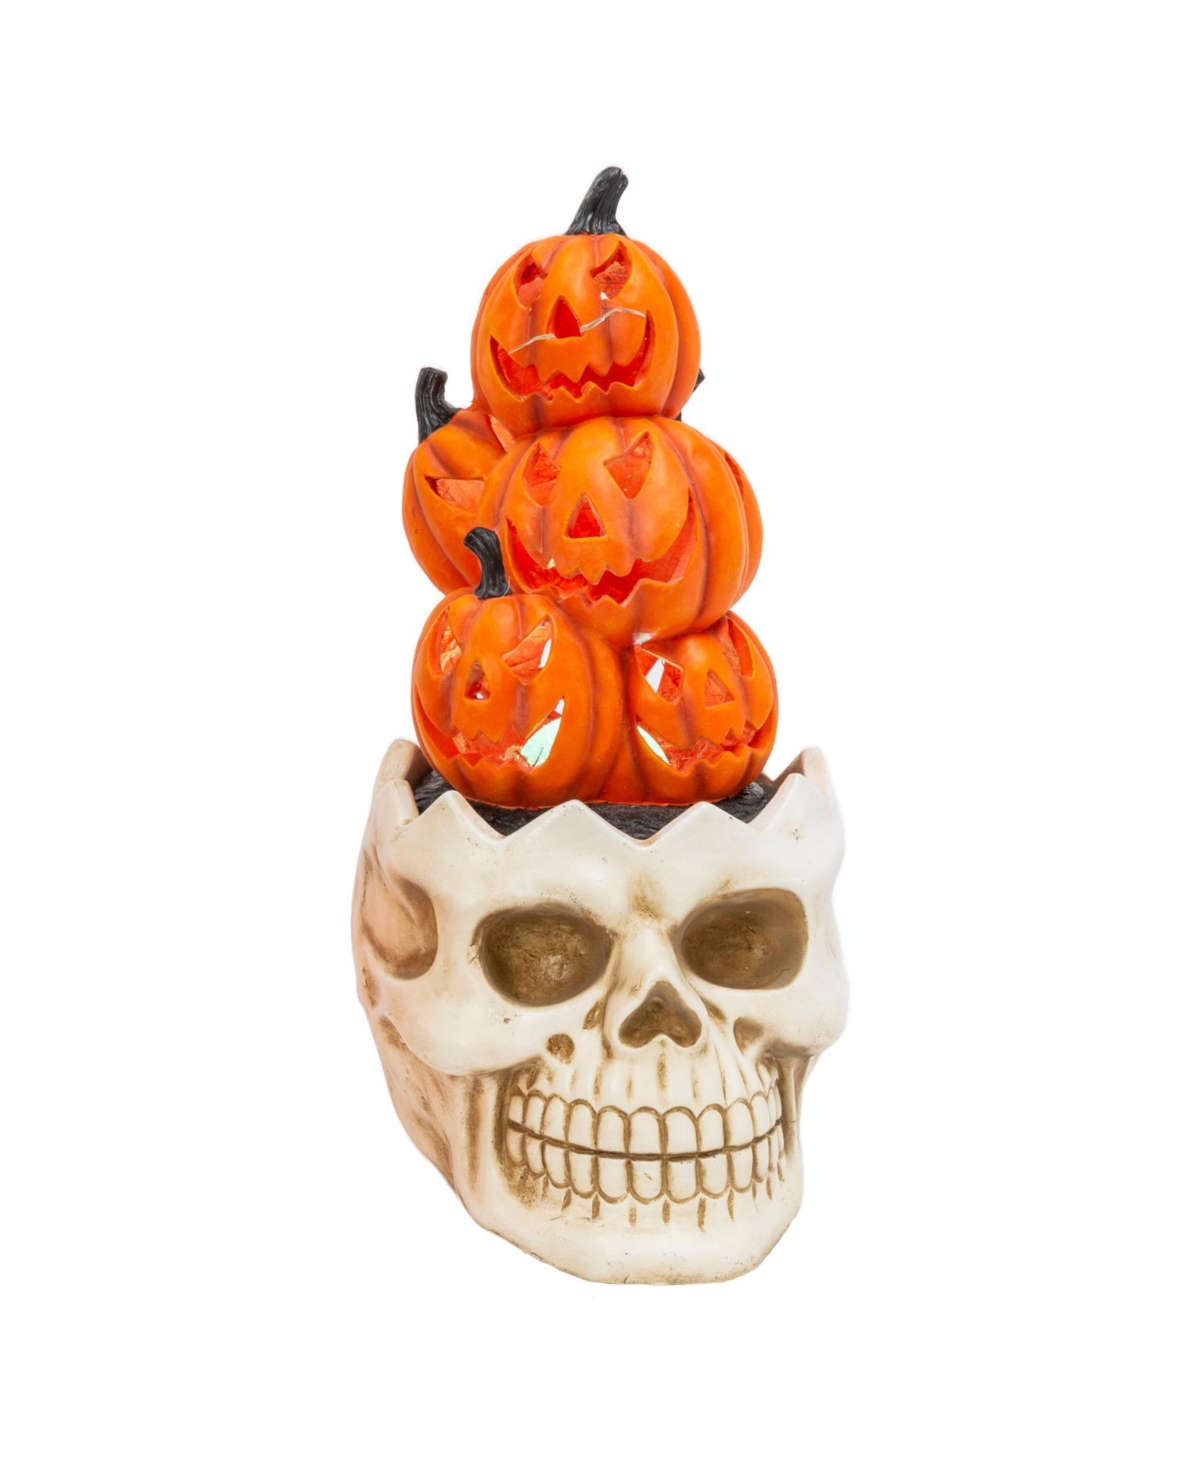 23" H Electric Lighted Magnesium Smoking Skull with Pumpkins on Top - Multicolor